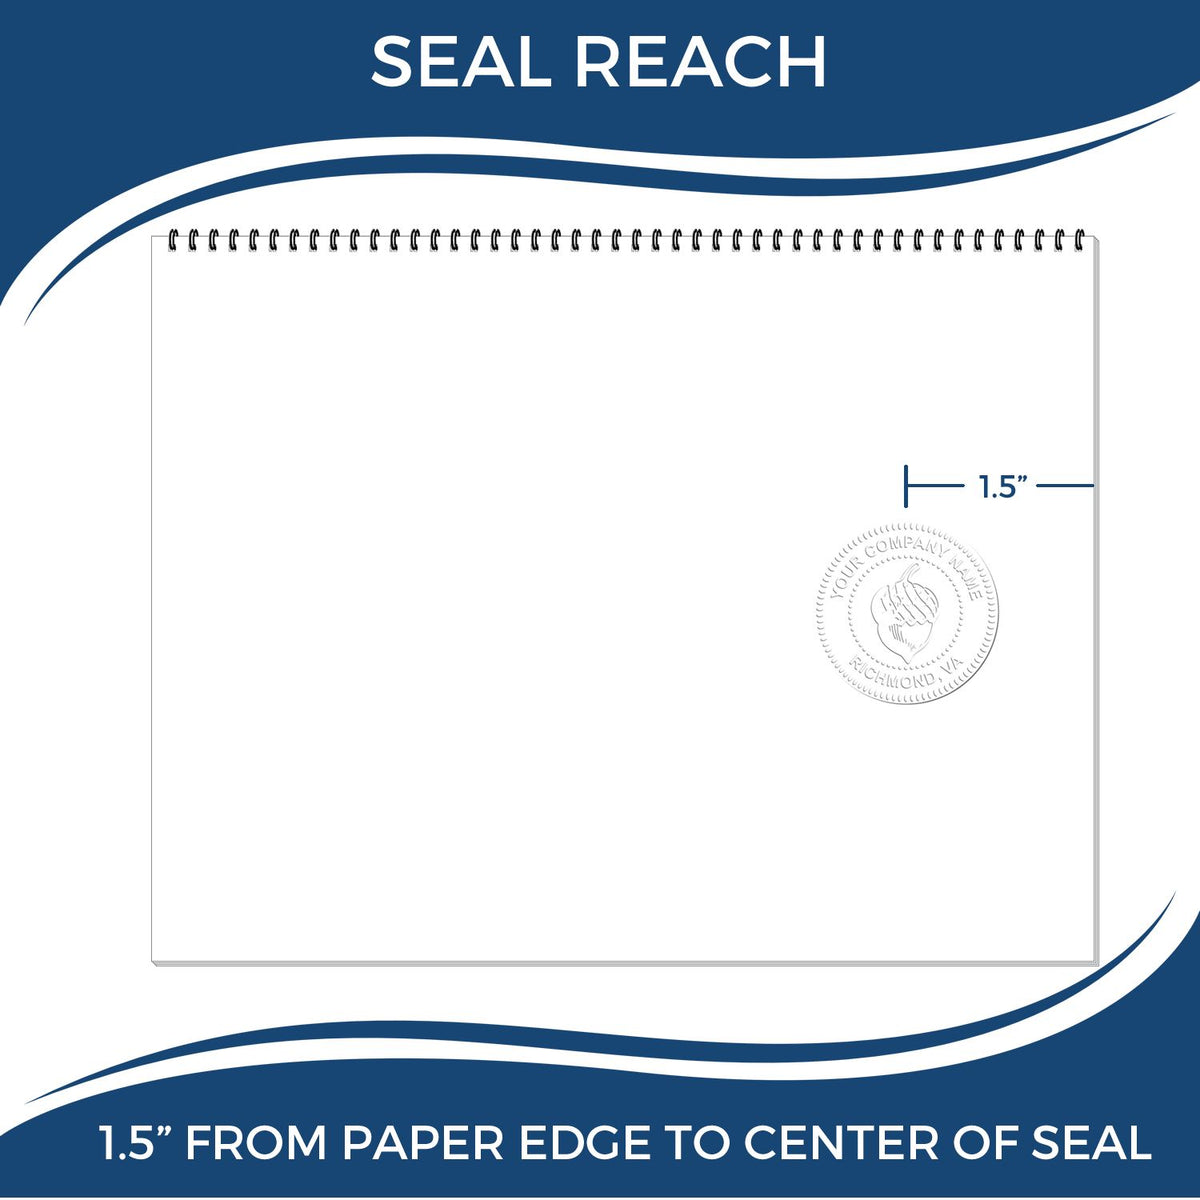 An infographic showing the seal reach which is represented by a ruler and a miniature seal image of the Soft Pocket Texas Landscape Architect Embosser